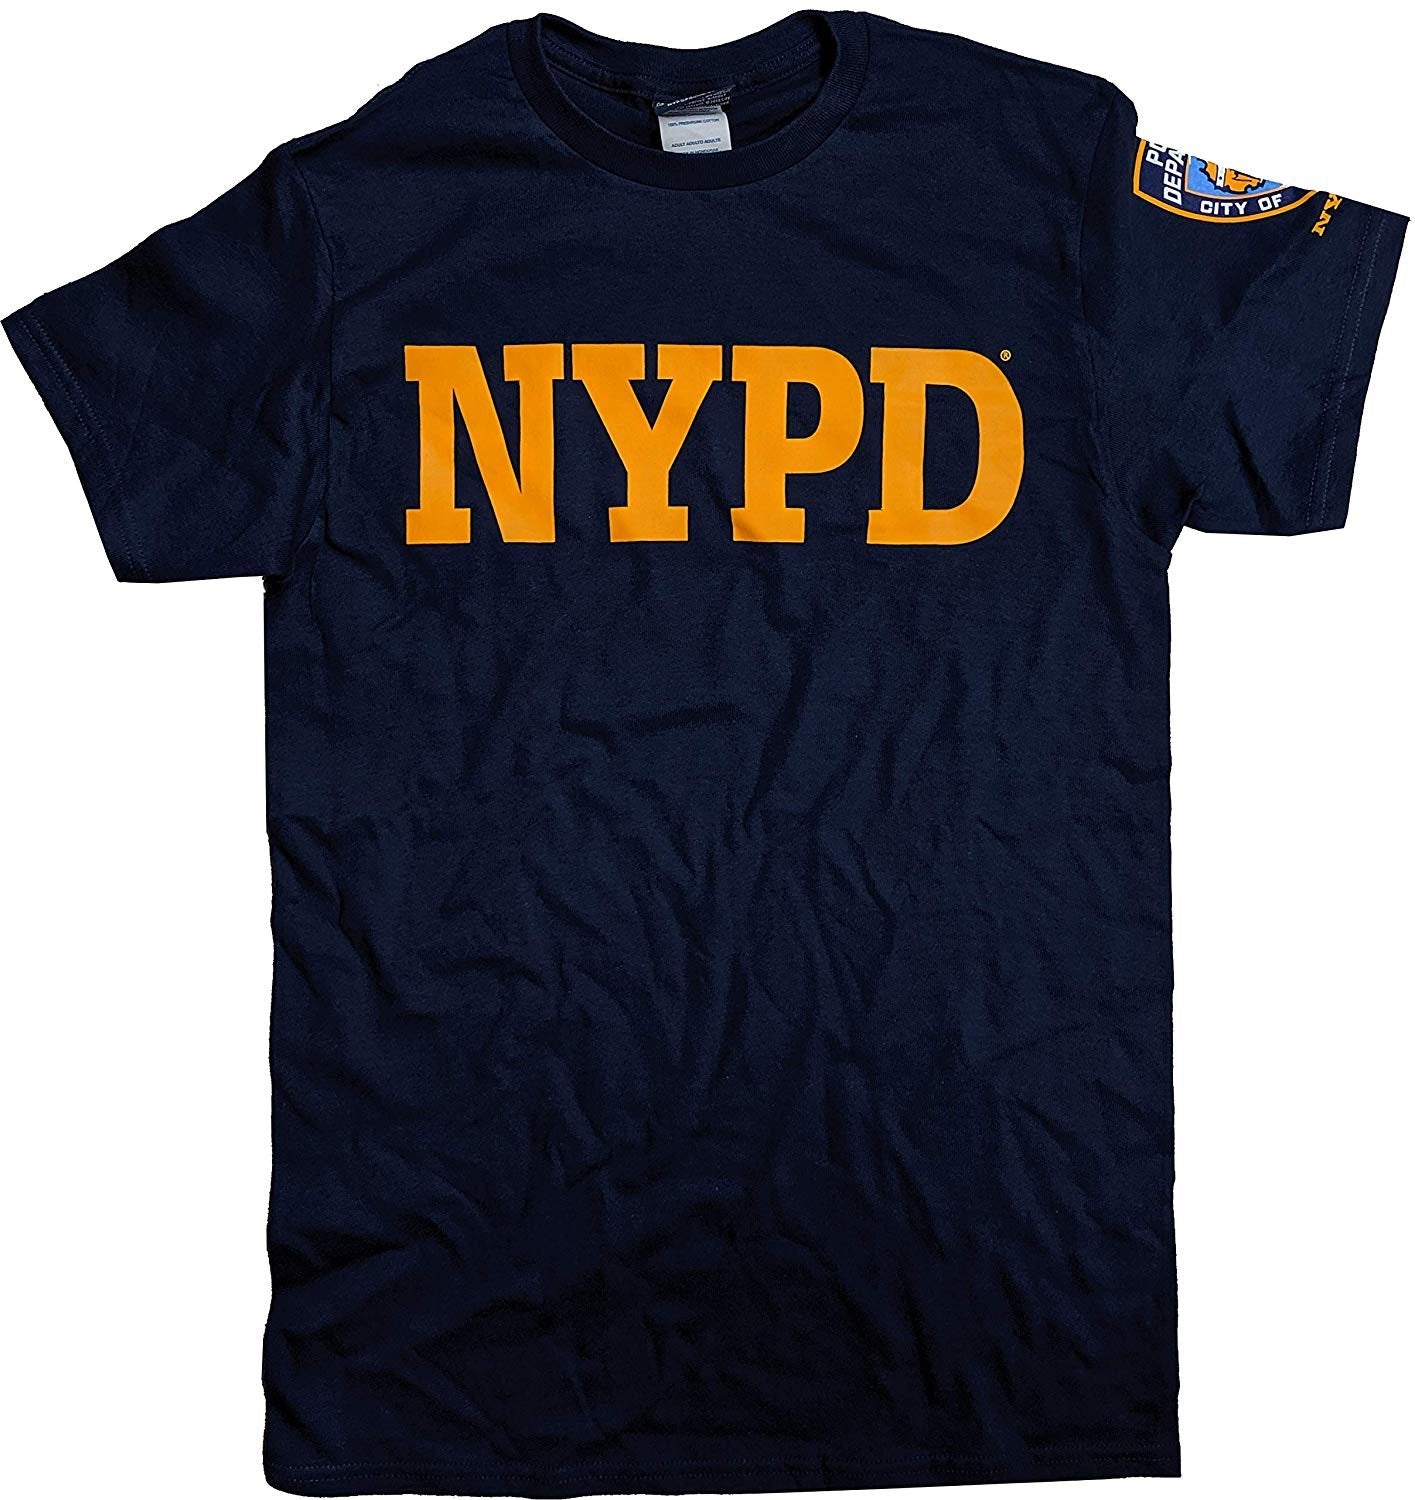 NYPD Men's T-Shirt (Front & Sleeve Print, Navy / Gold)